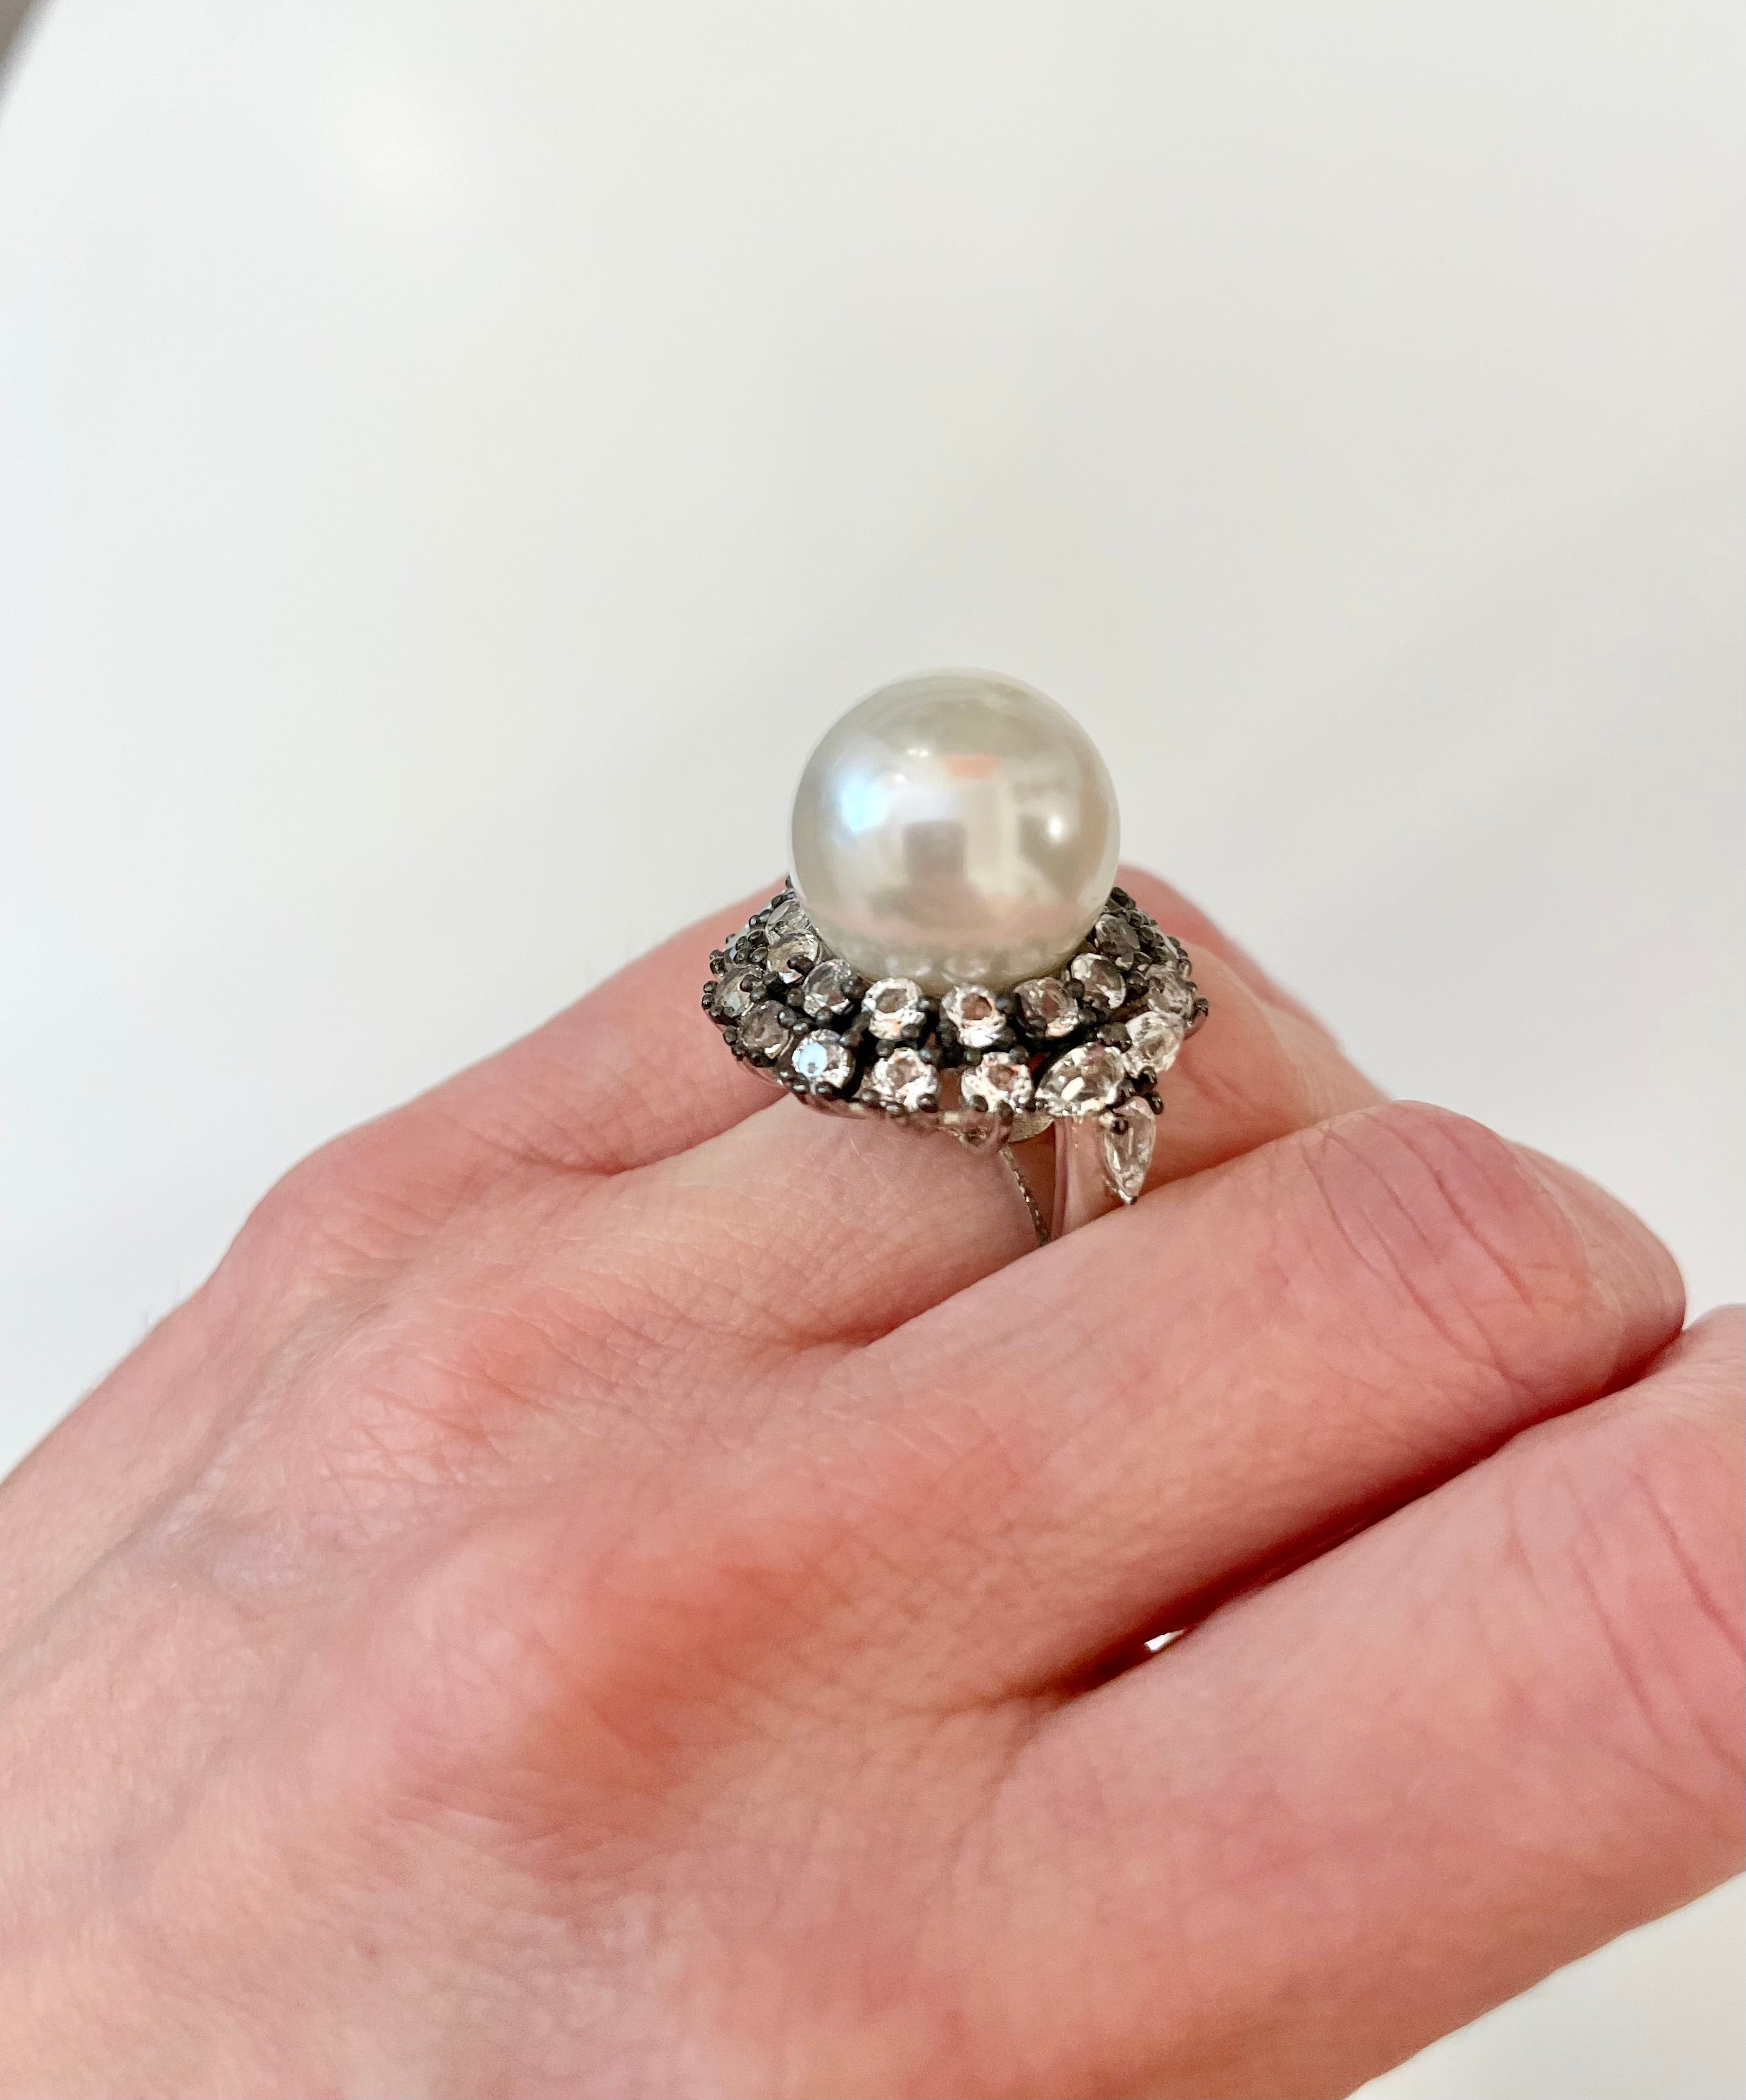 The charming martini large pearl cocktail ring.... so divine